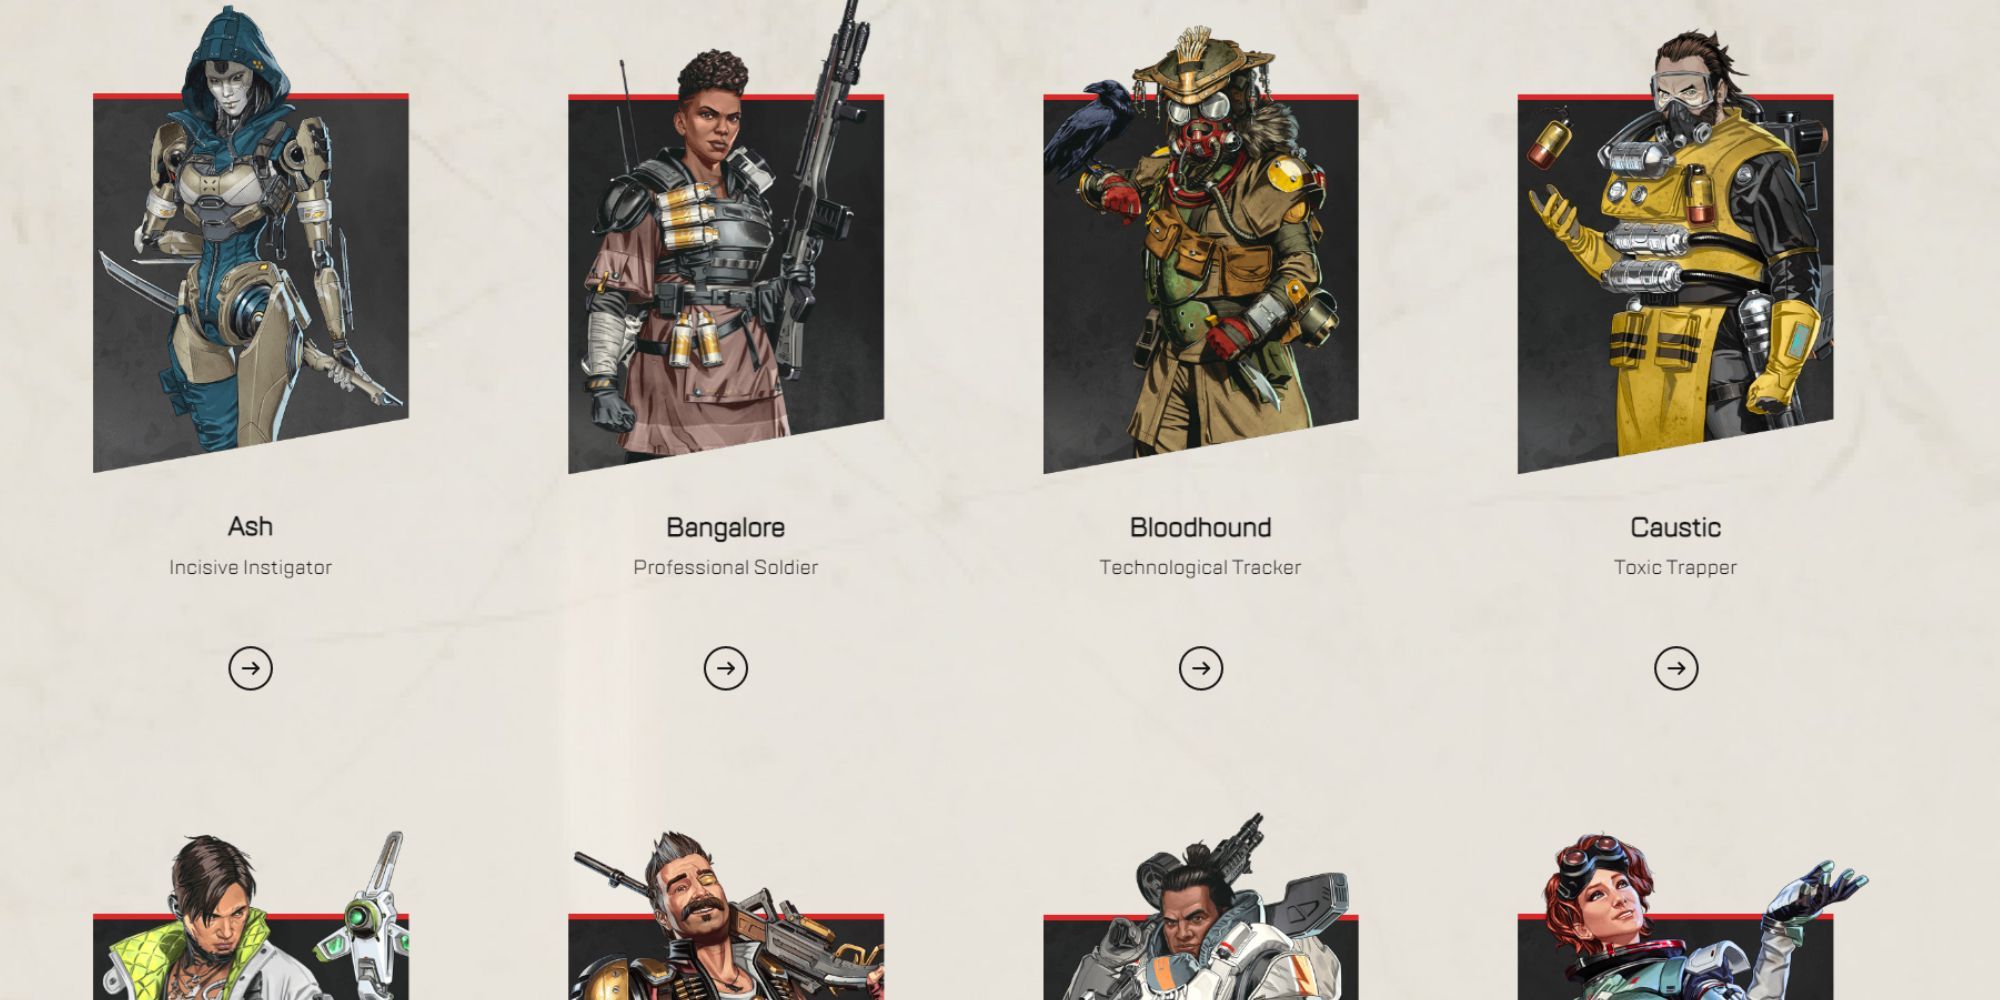 Official art for apex legends Ash, Bangalore, Bloodhound, Caustic, Crypto, Fuse, Gibraltar, and Horizon